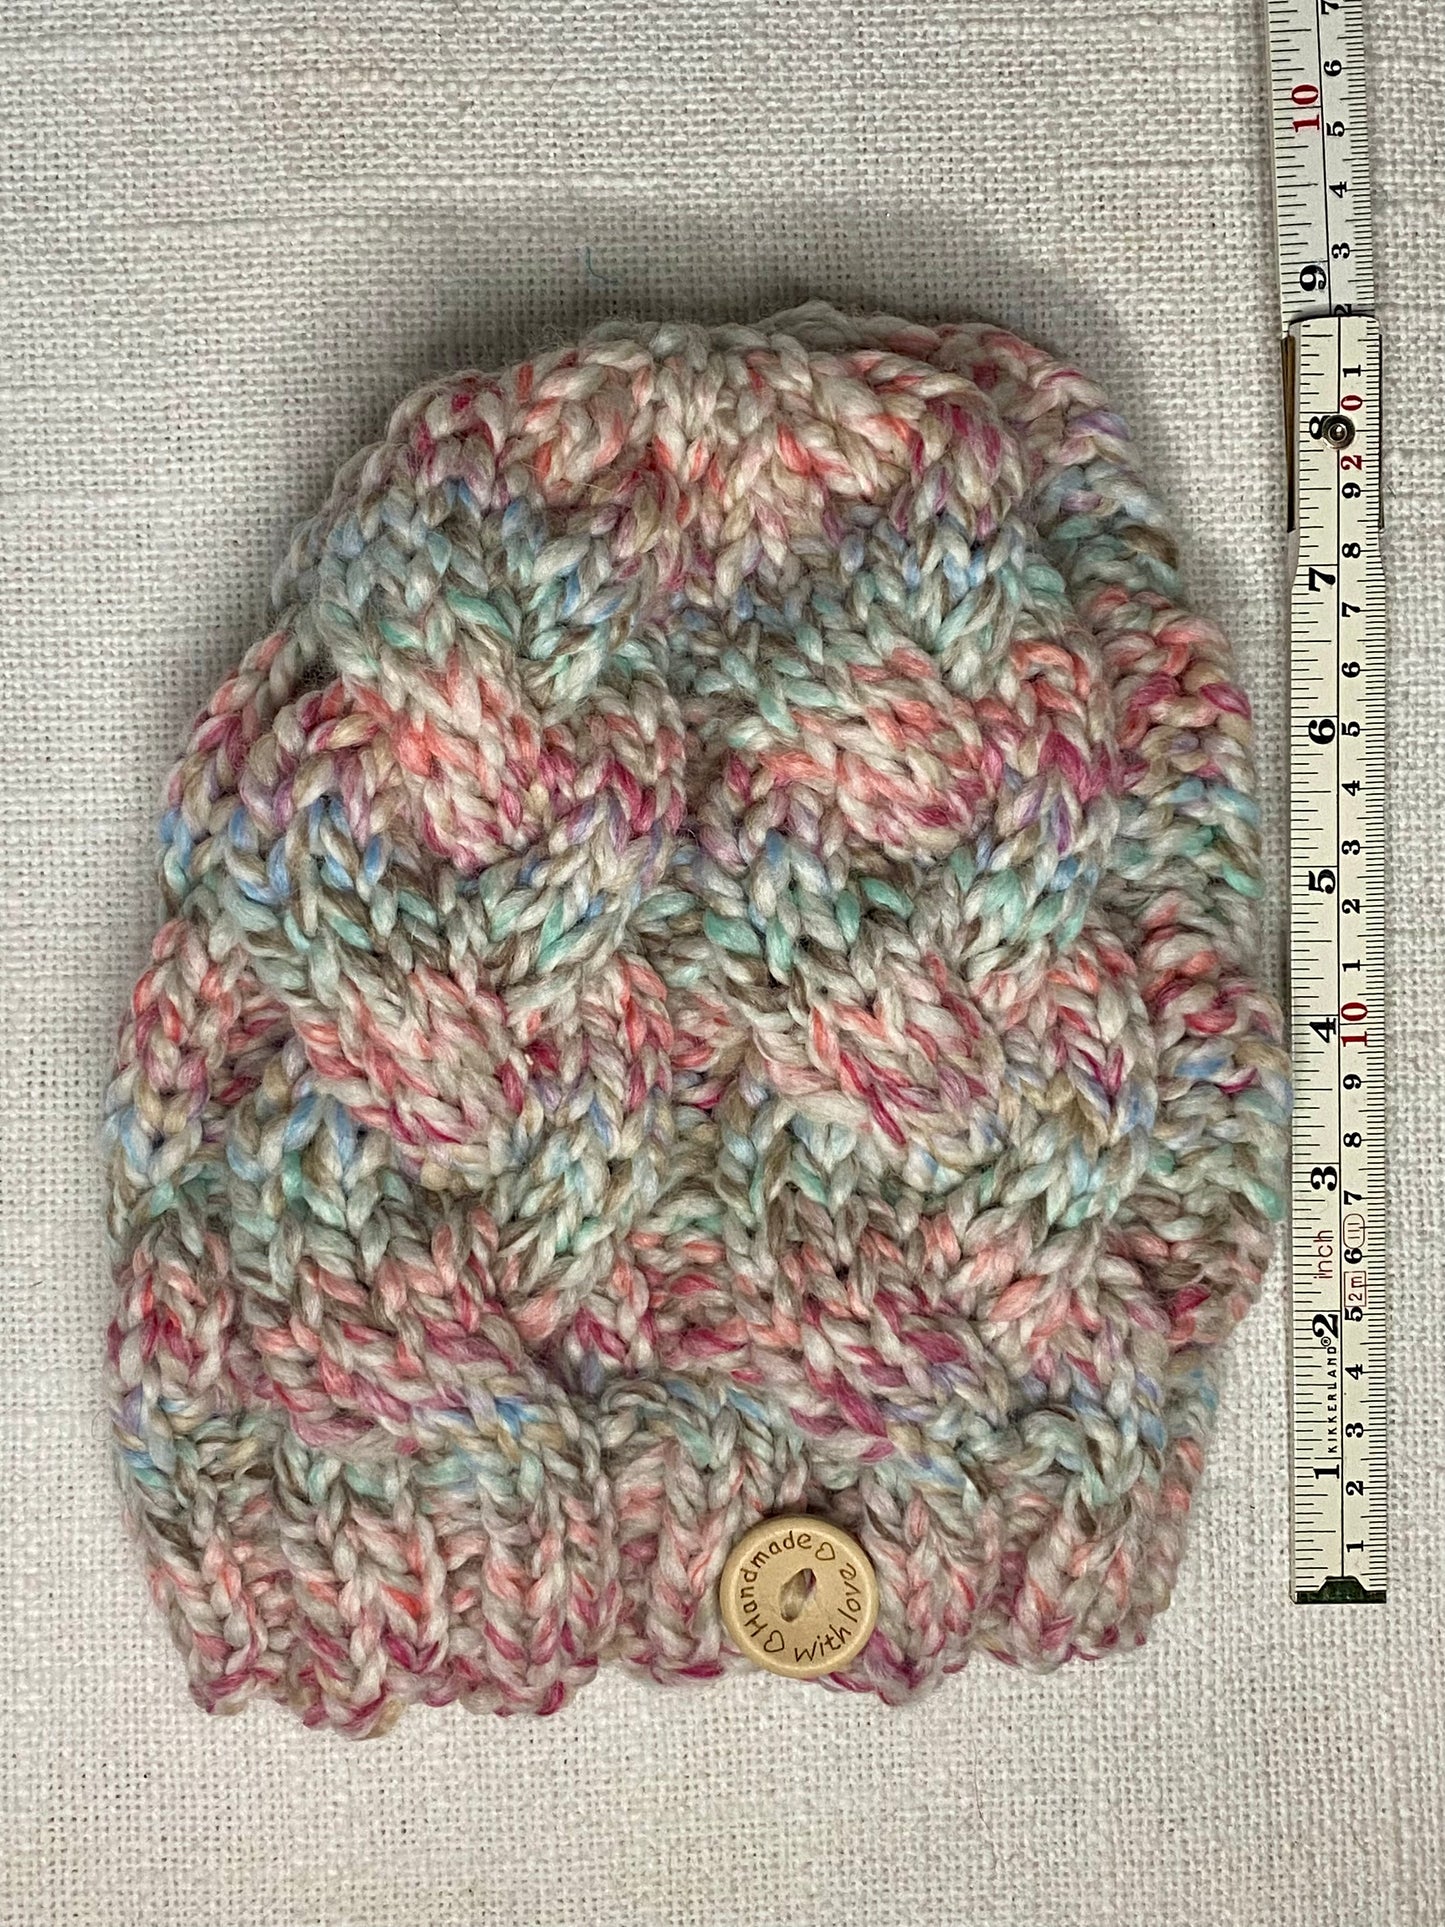 Cozy Cables Hat in Carnival - Wool Blend Fiber